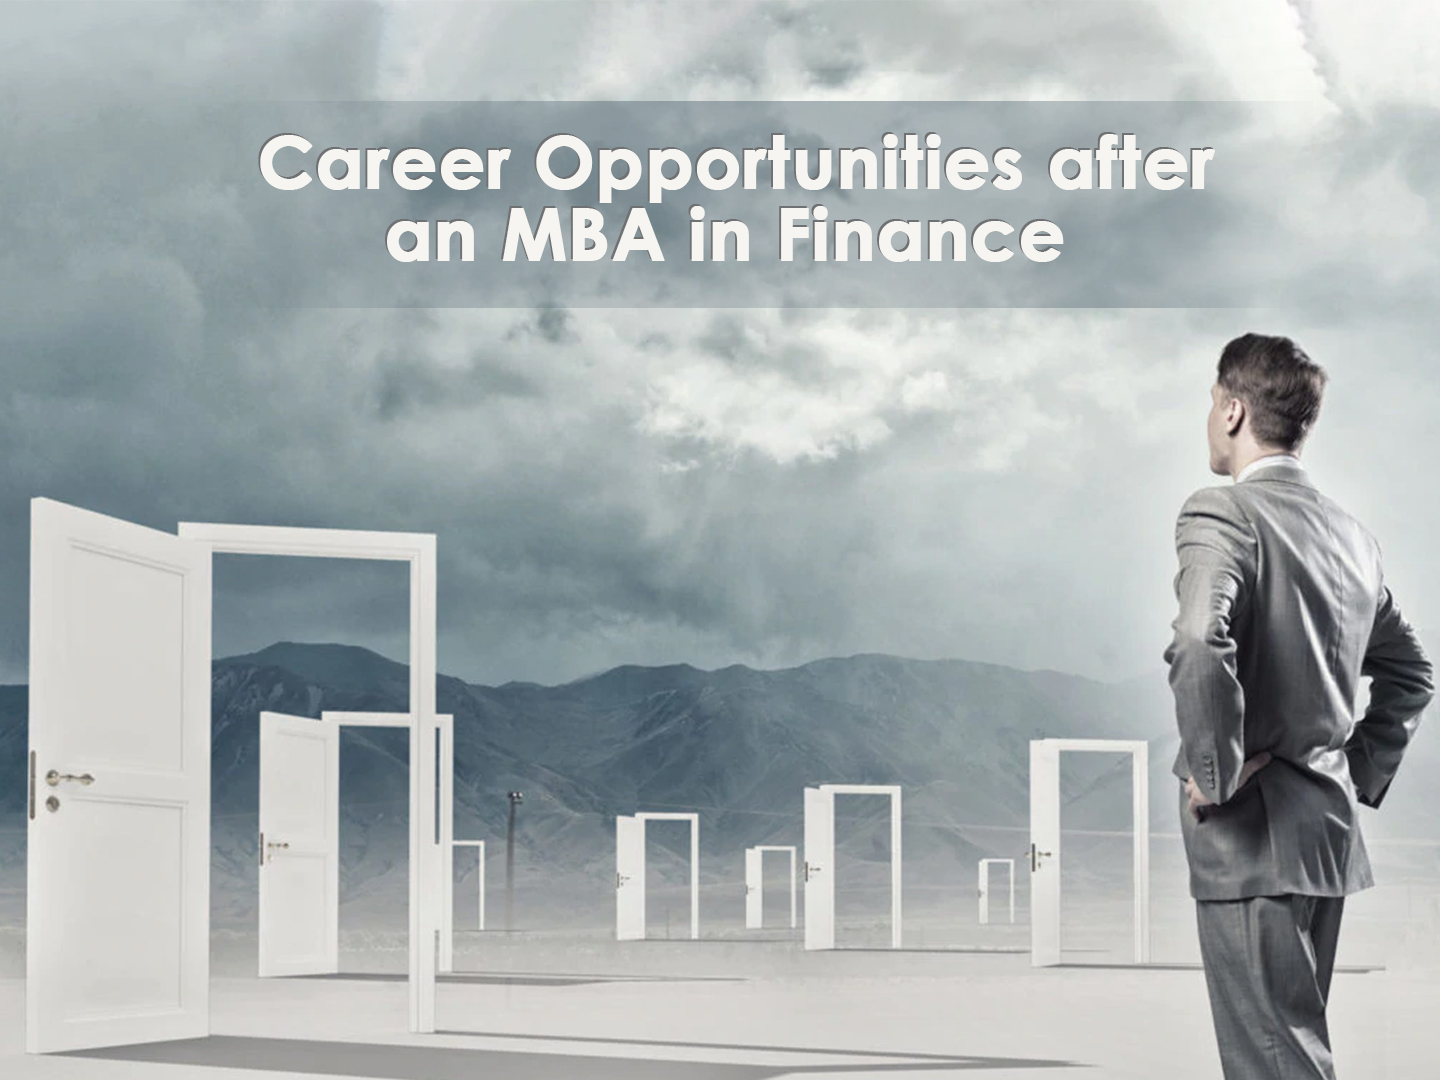 Know opportunities after an MBA in Finance